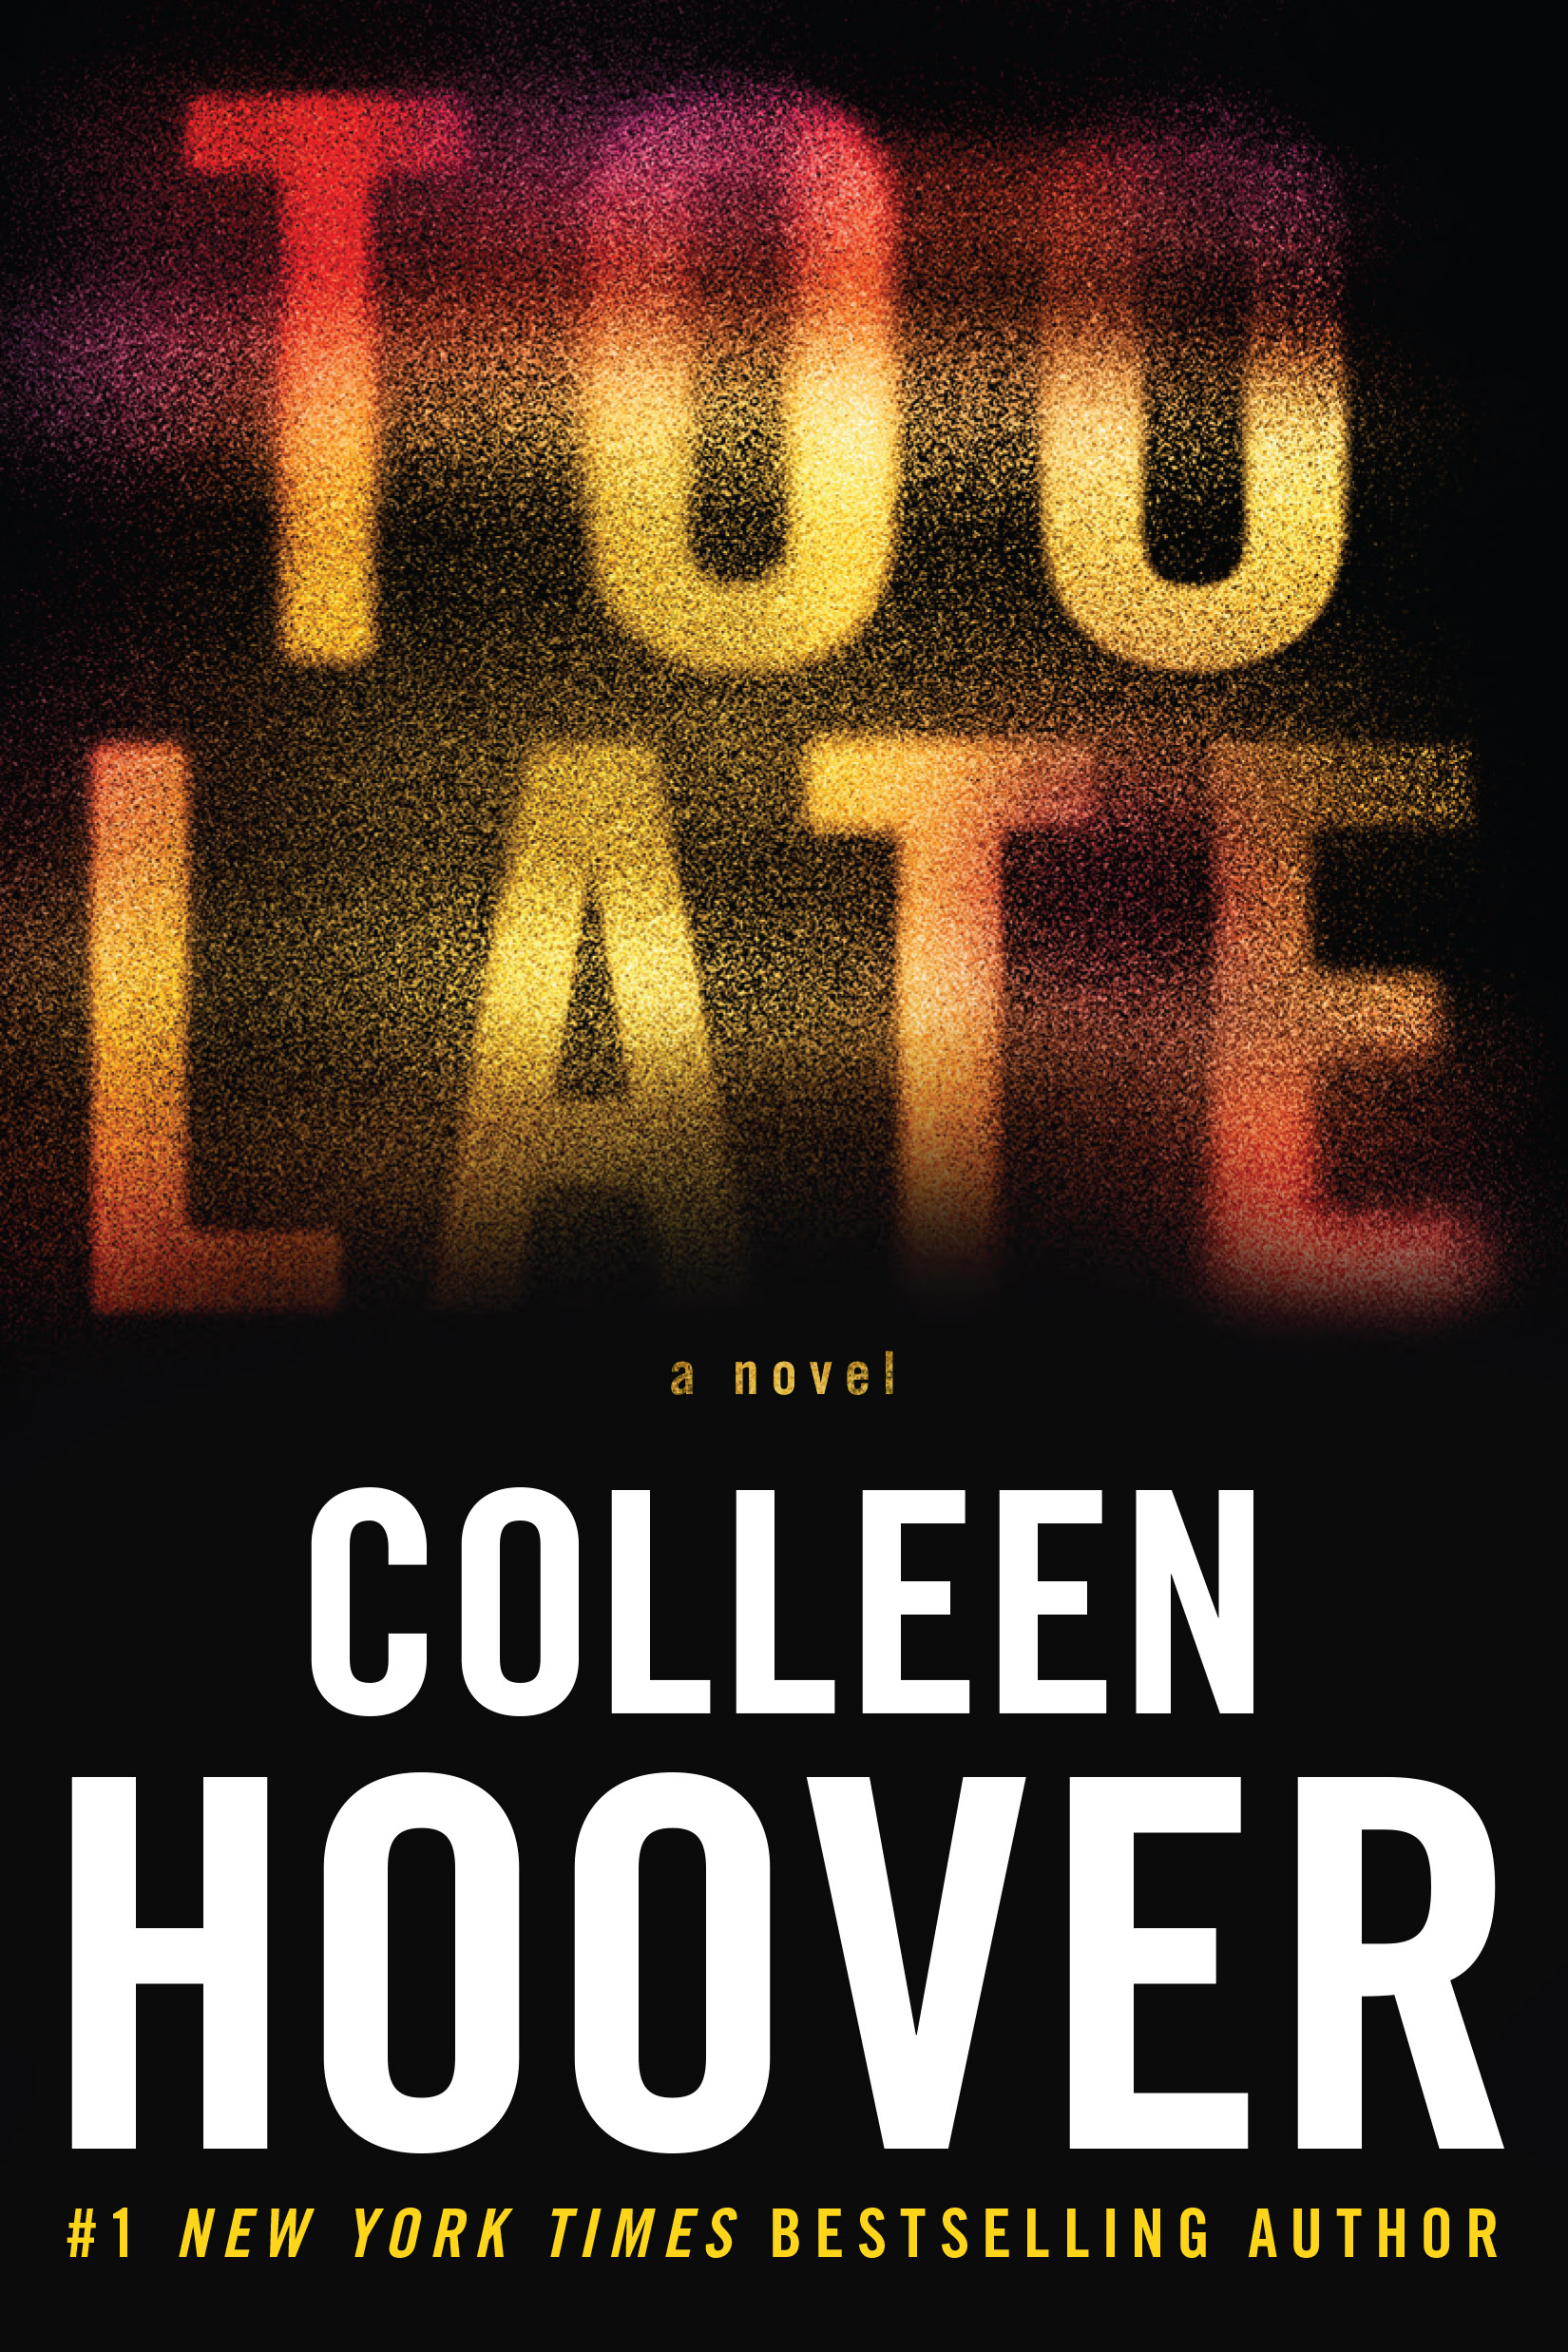 Colleen Hoover Books: The Biography of Colleen Hoover: Author of